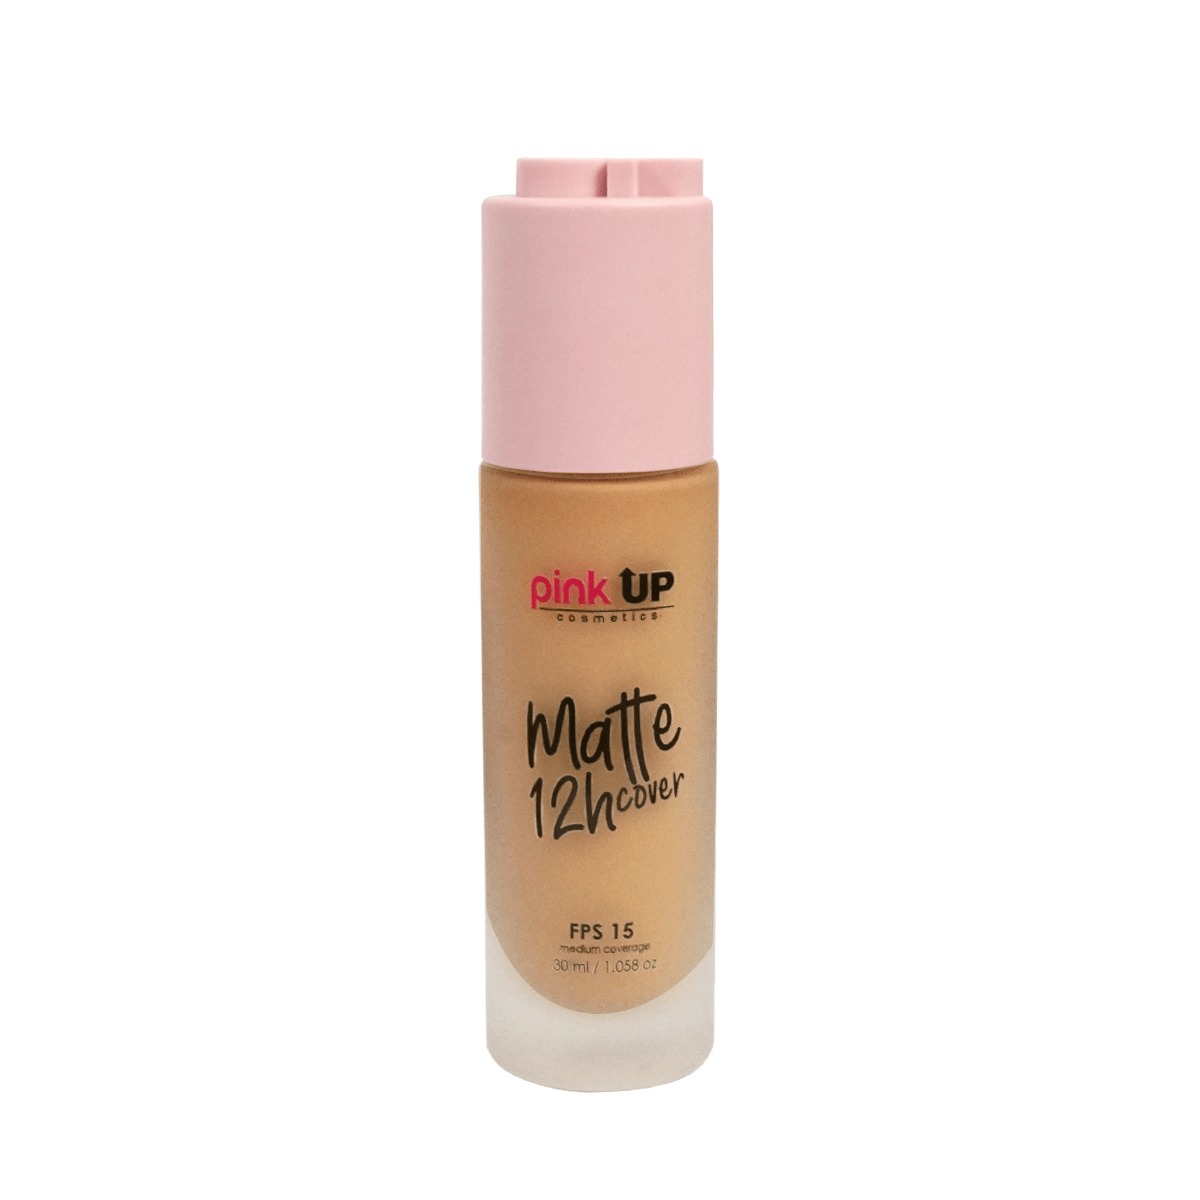 Pink Up - Matte Cover 12 Hours Tan